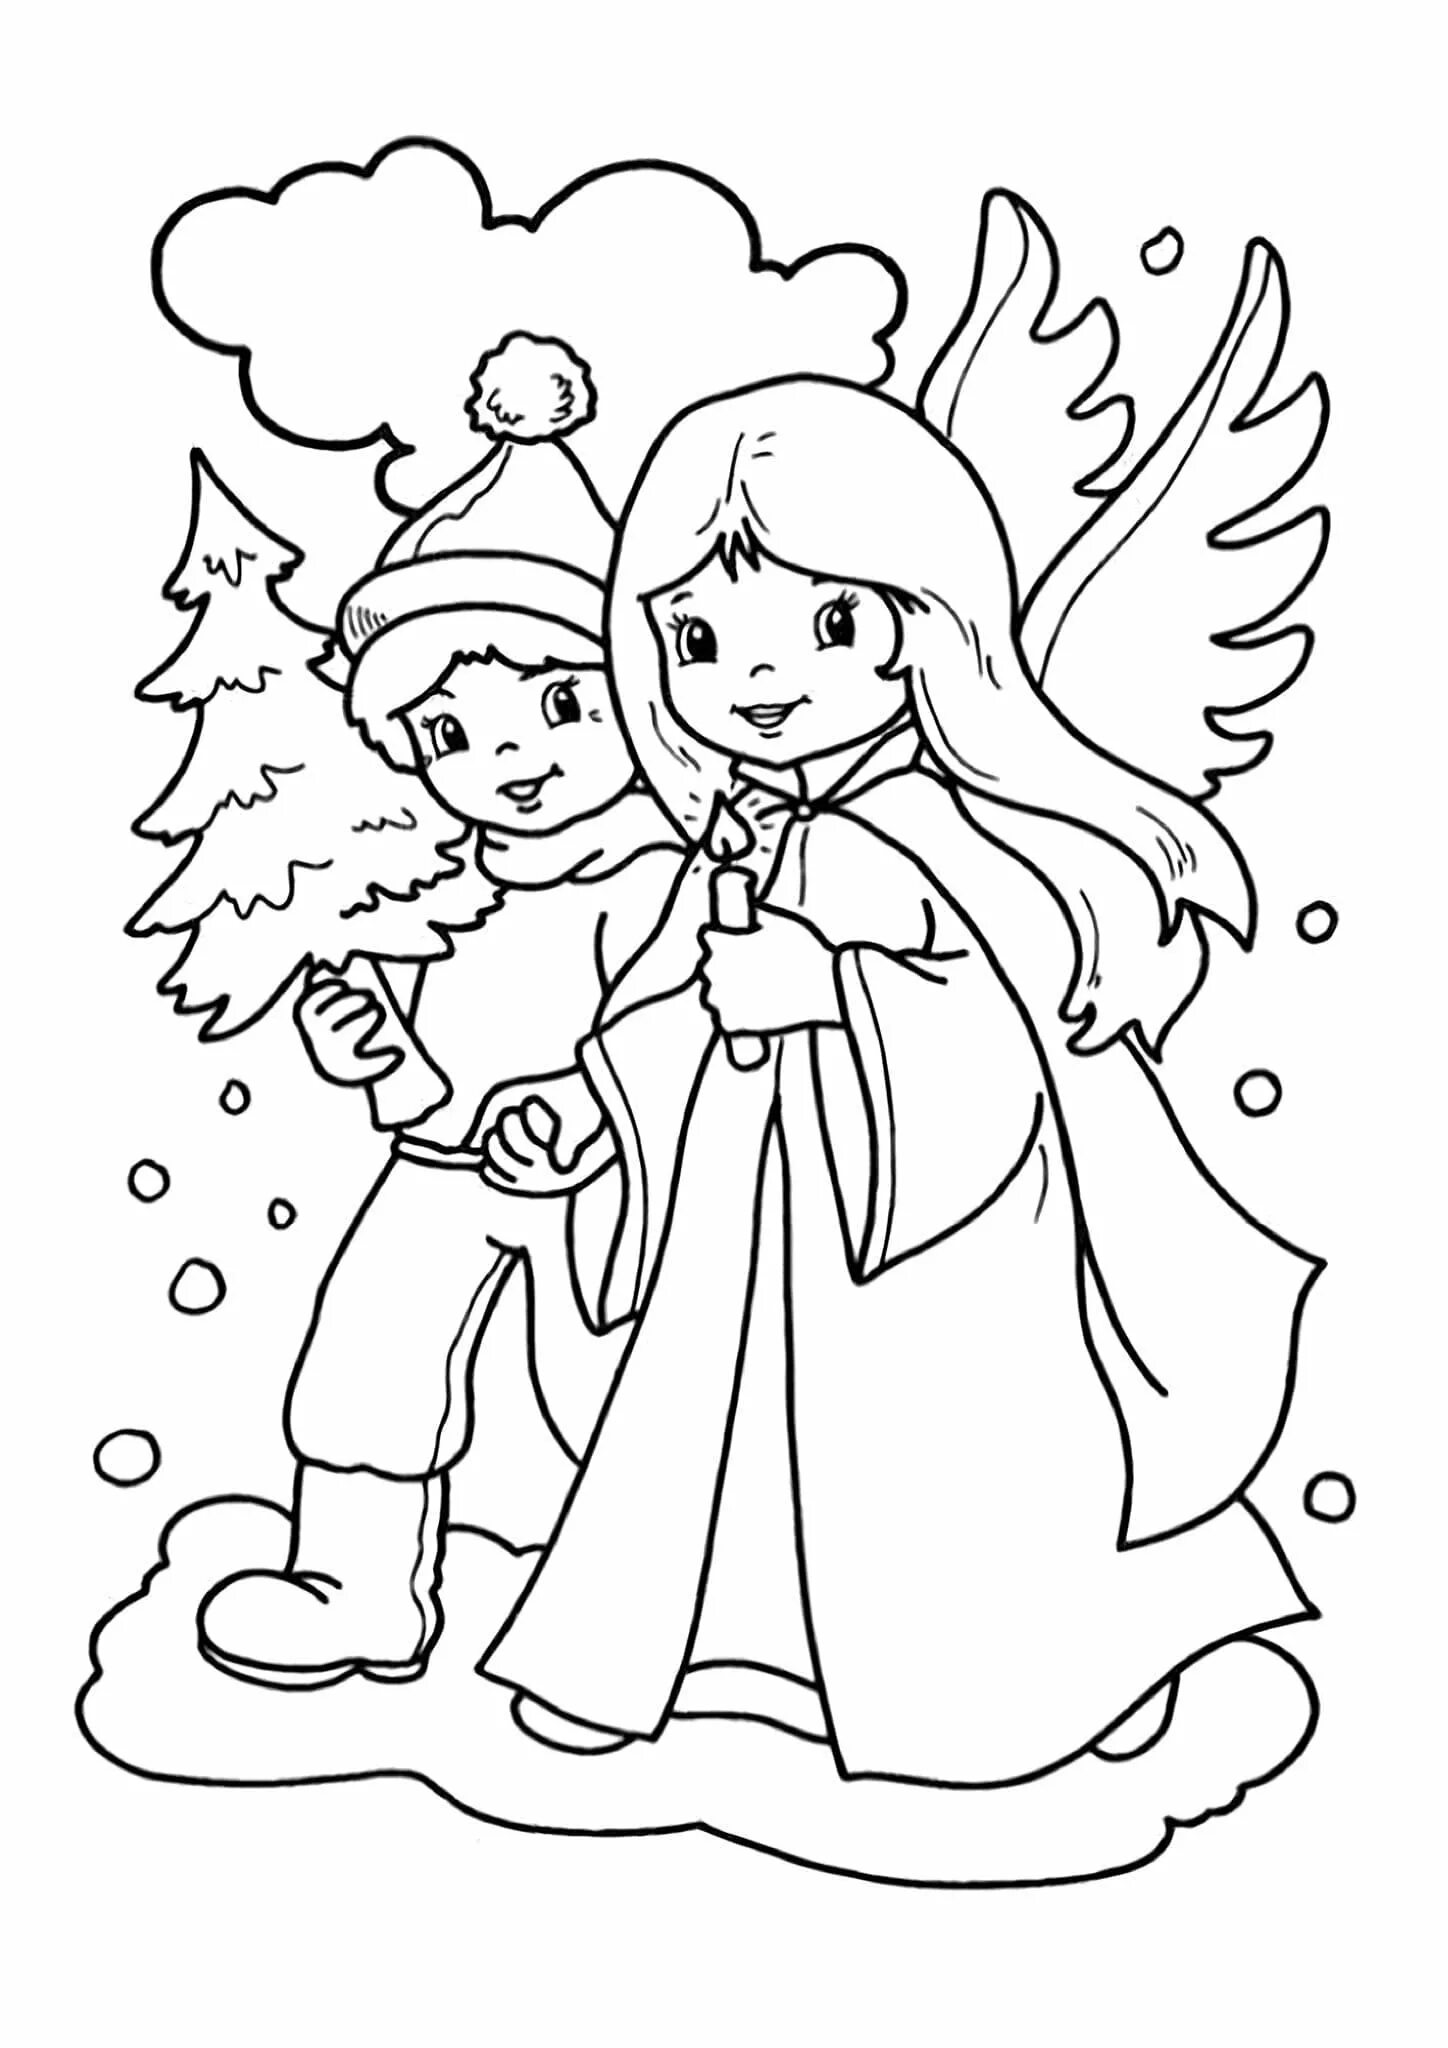 Christmas live coloring for children 4-5 years old